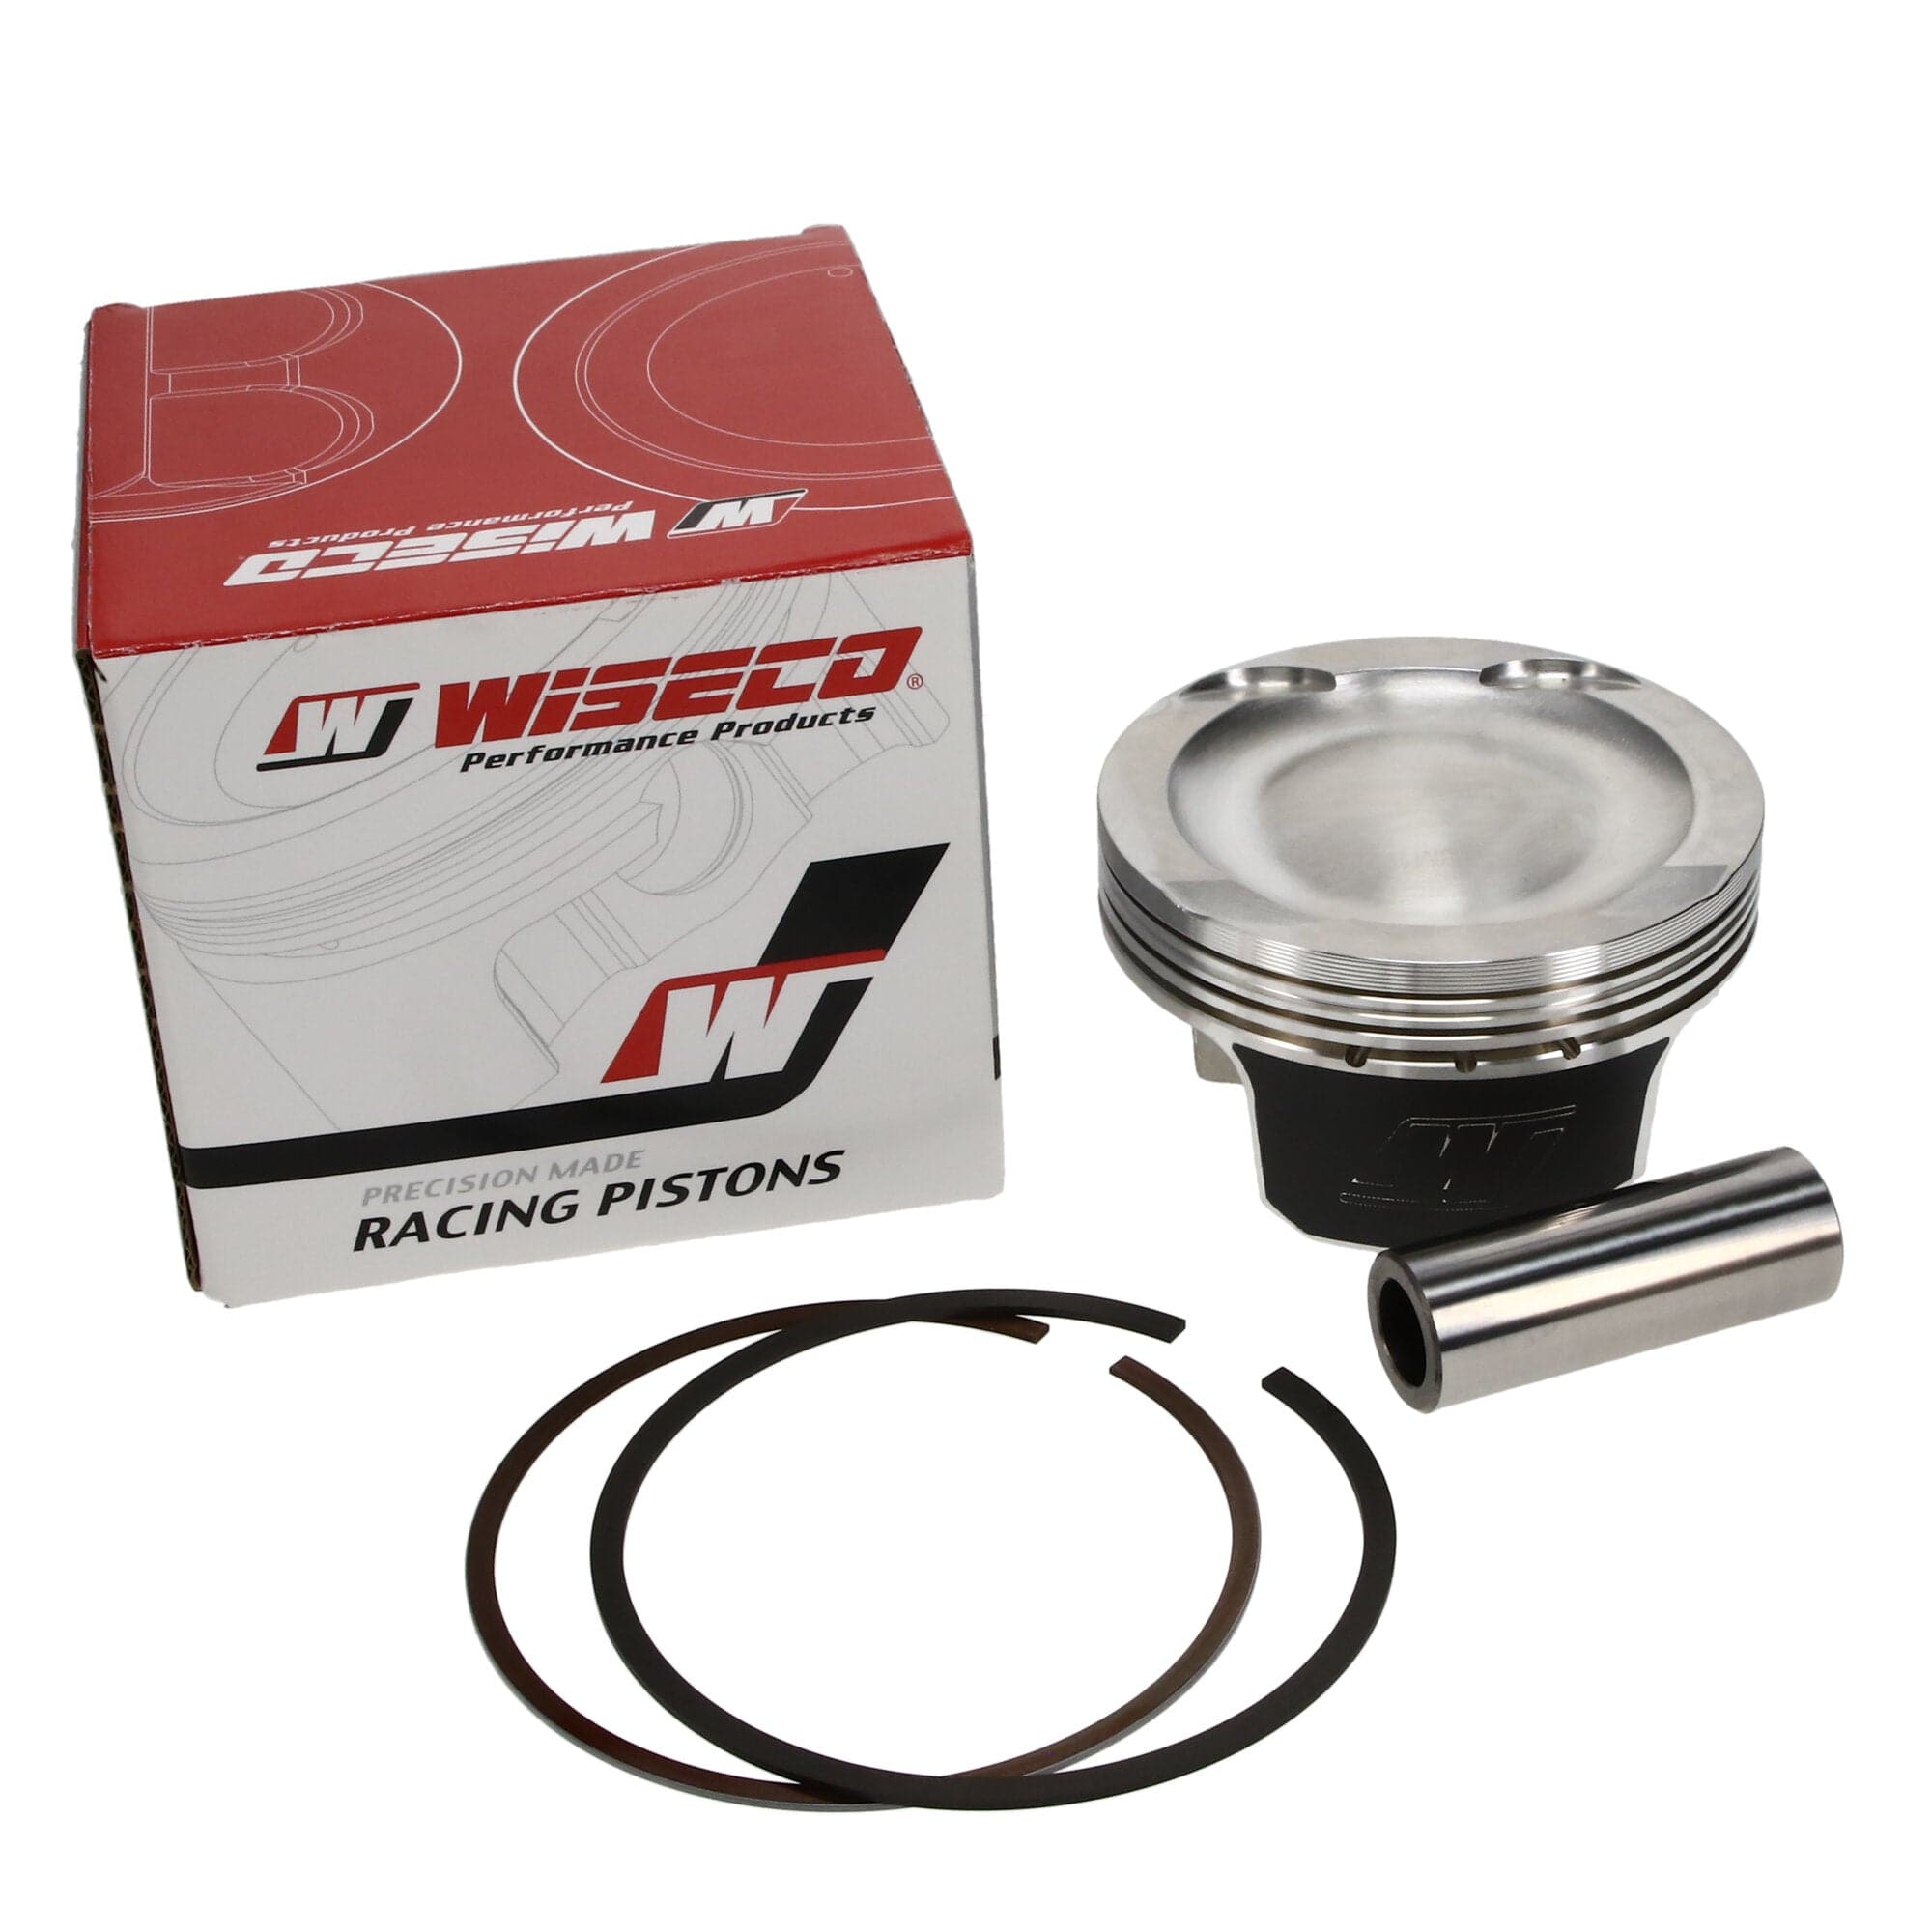 Wiseco Piston and Ring set for Sea-Doo '05-15 RXP, RXP-X, RXT, RXT-X Forged Piston